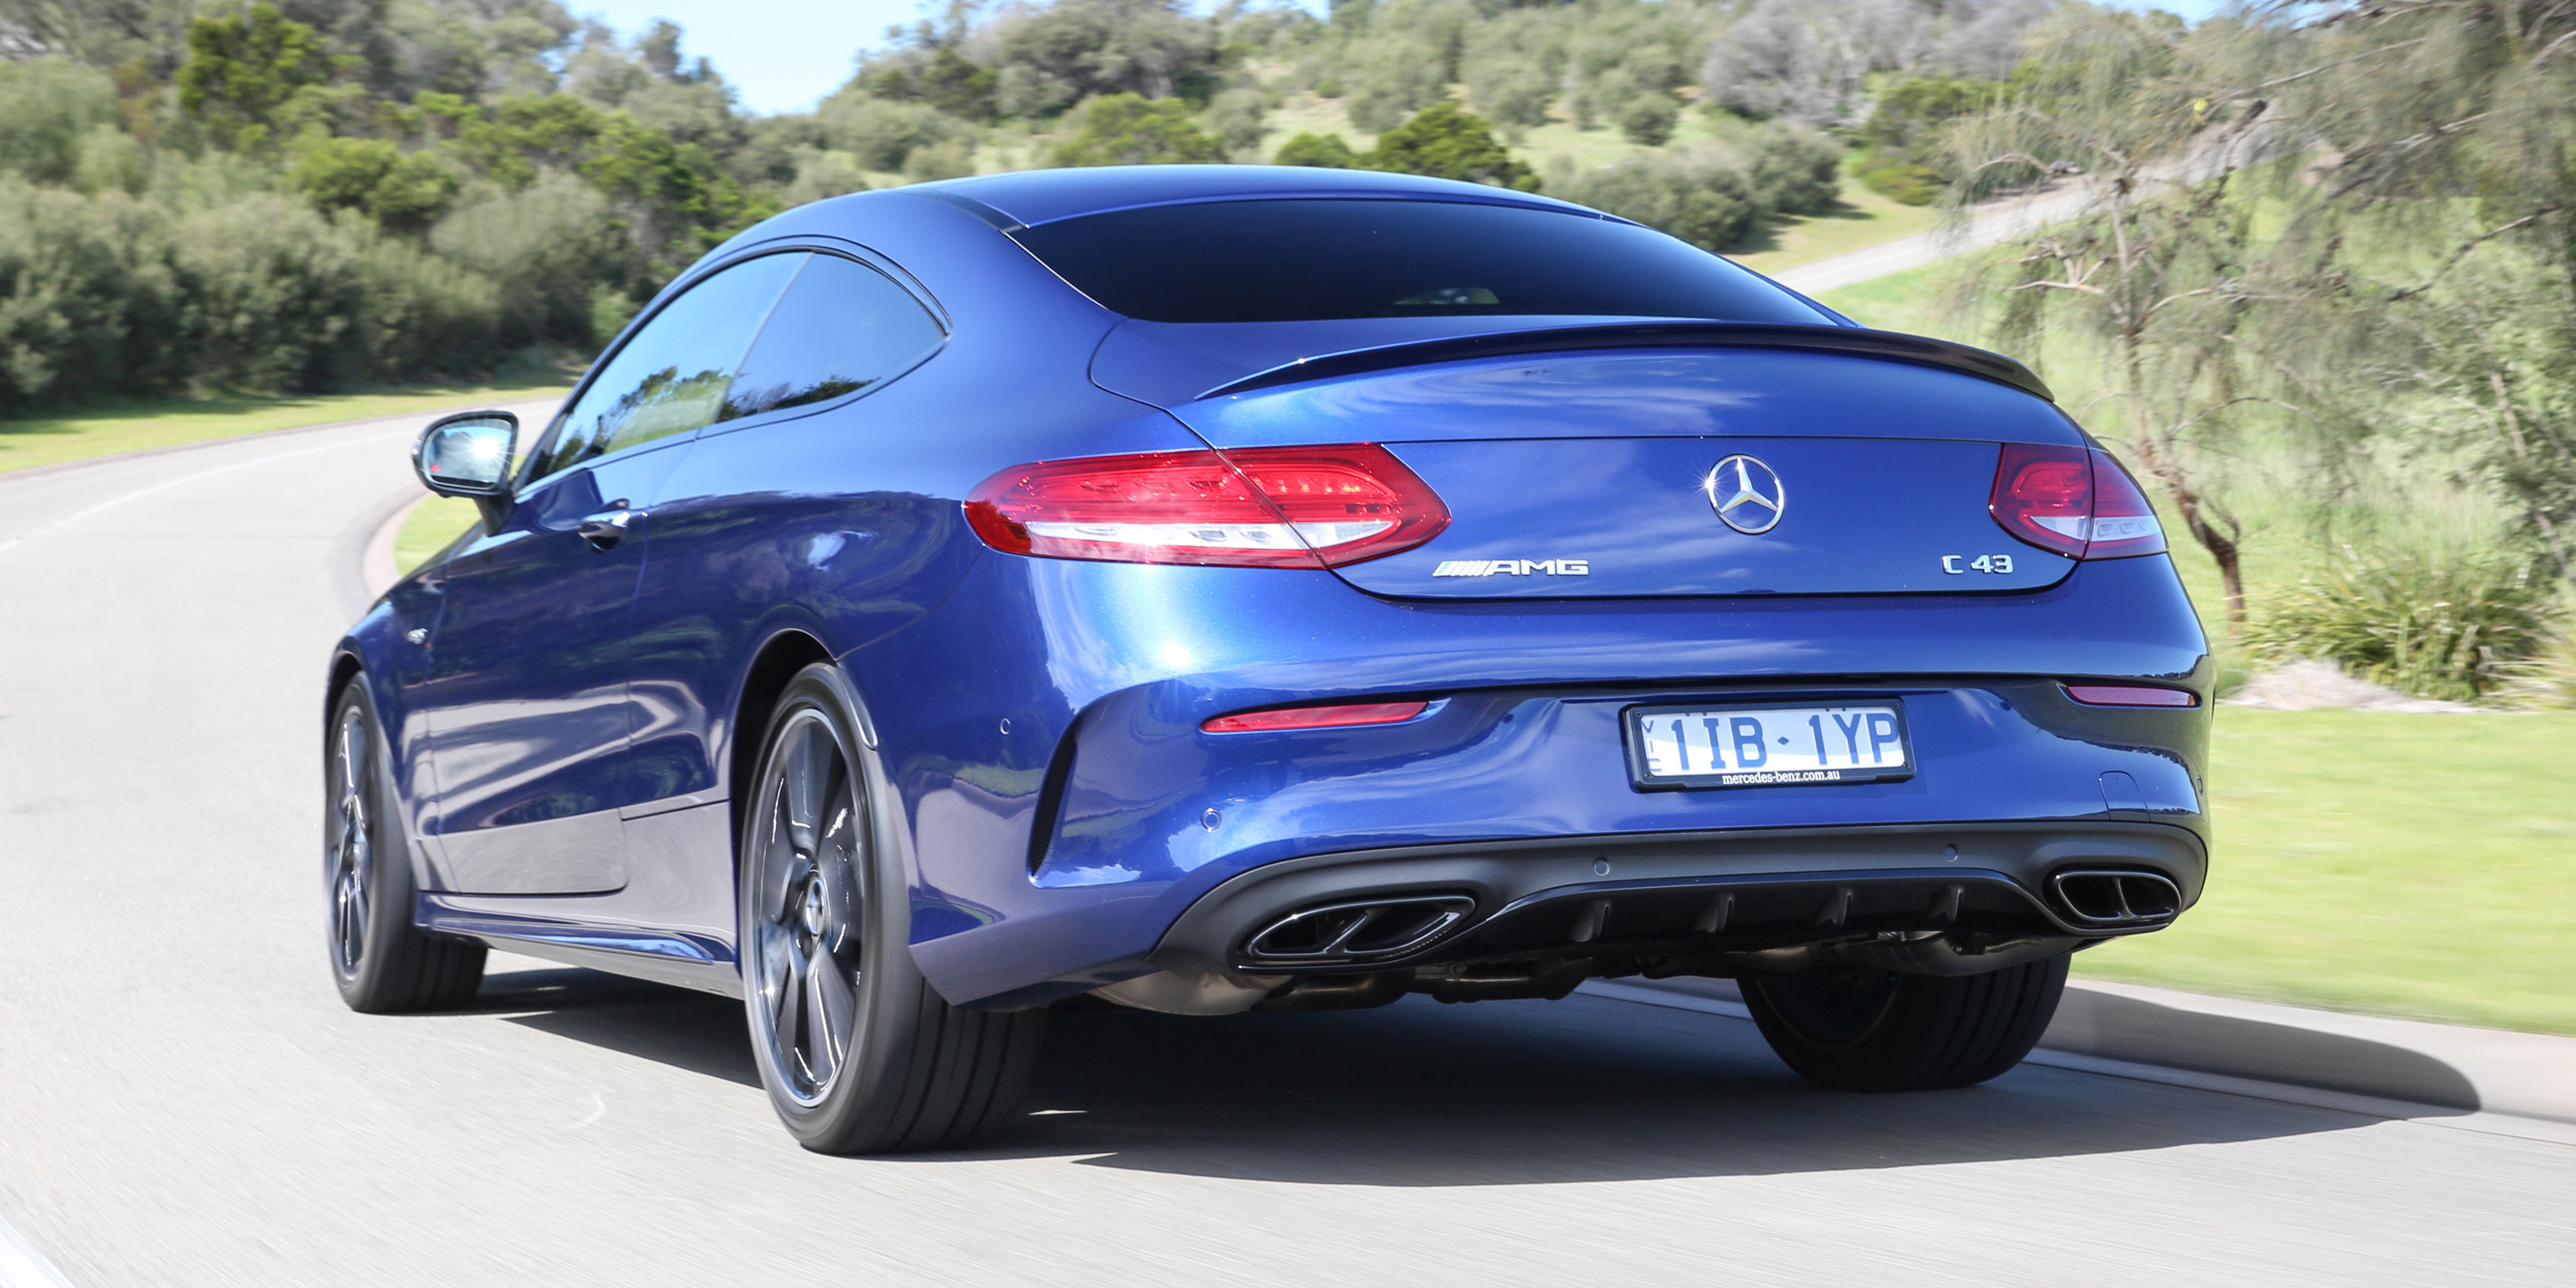 2017 Mercedes Amg C43 Coupe Review Photos Caradvice